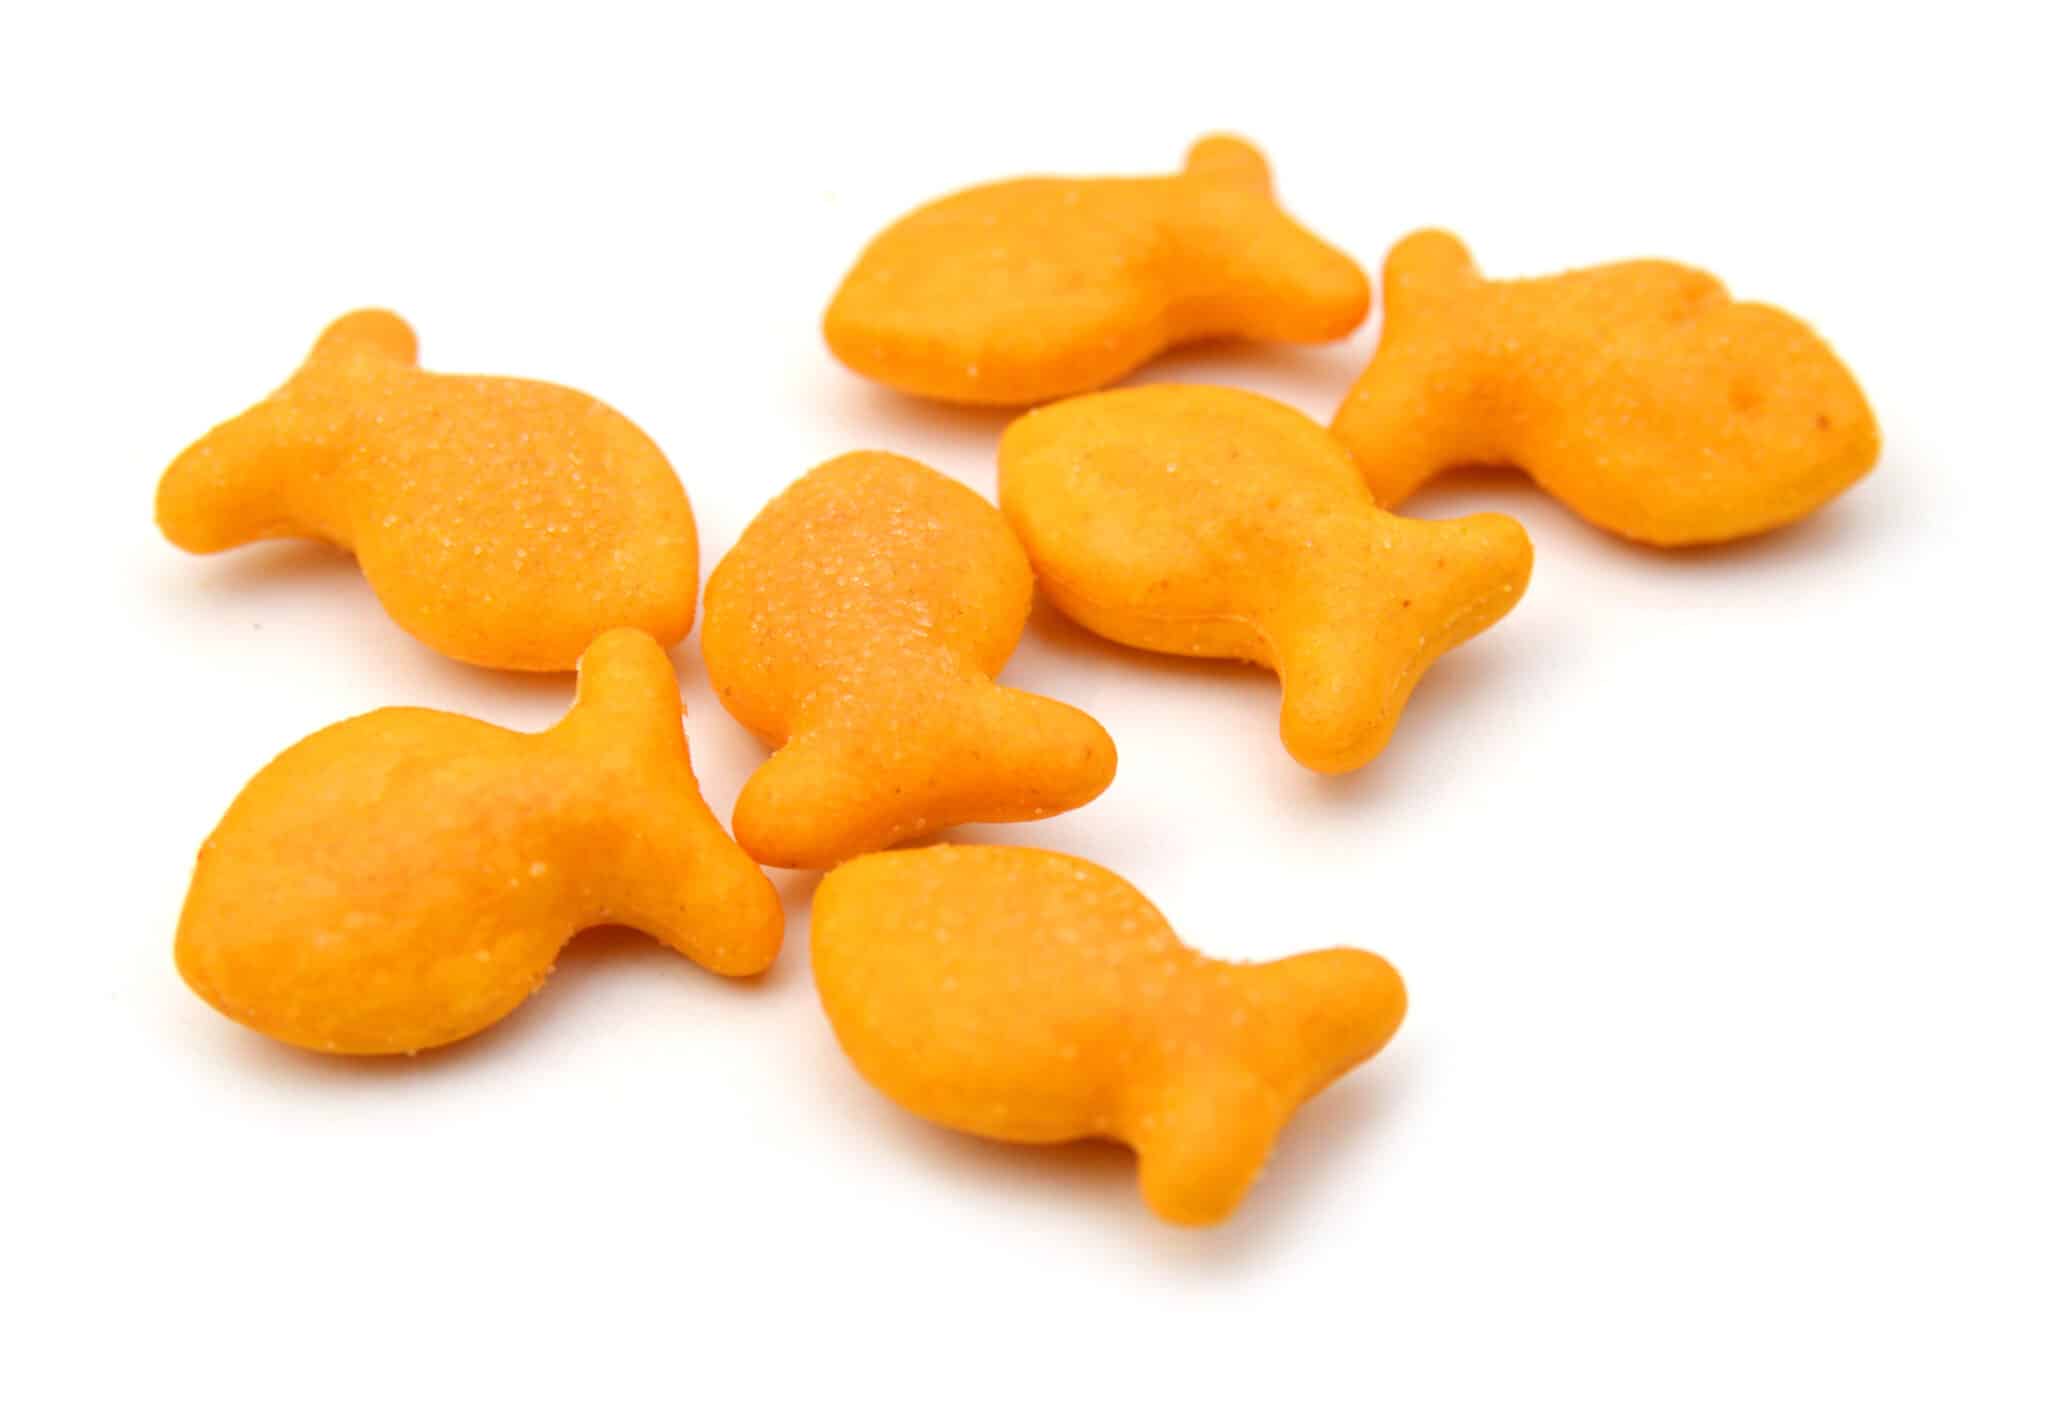 Can cats eat goldfish crackers